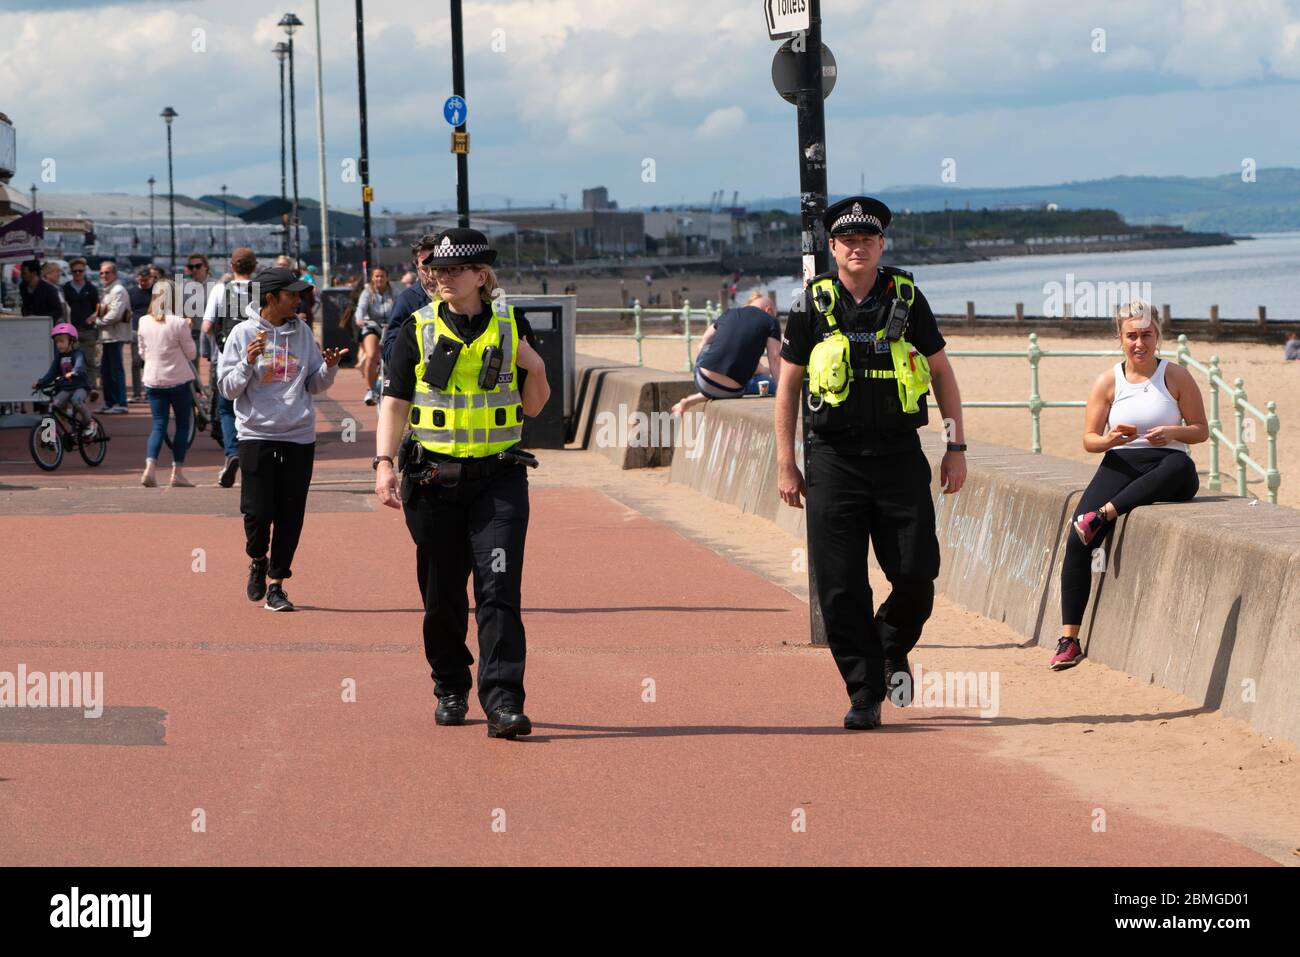 Portobello, Scotland, UK. 9 May 2020. Images from holiday weekend Saturday afternoon during Covid-19 lockdown on promenade at Portobello. Promenade and beach were relatively quiet with a low key police presence. Pictured; Police patrol on the promenade.  Iain Masterton/Alamy Live News Stock Photo